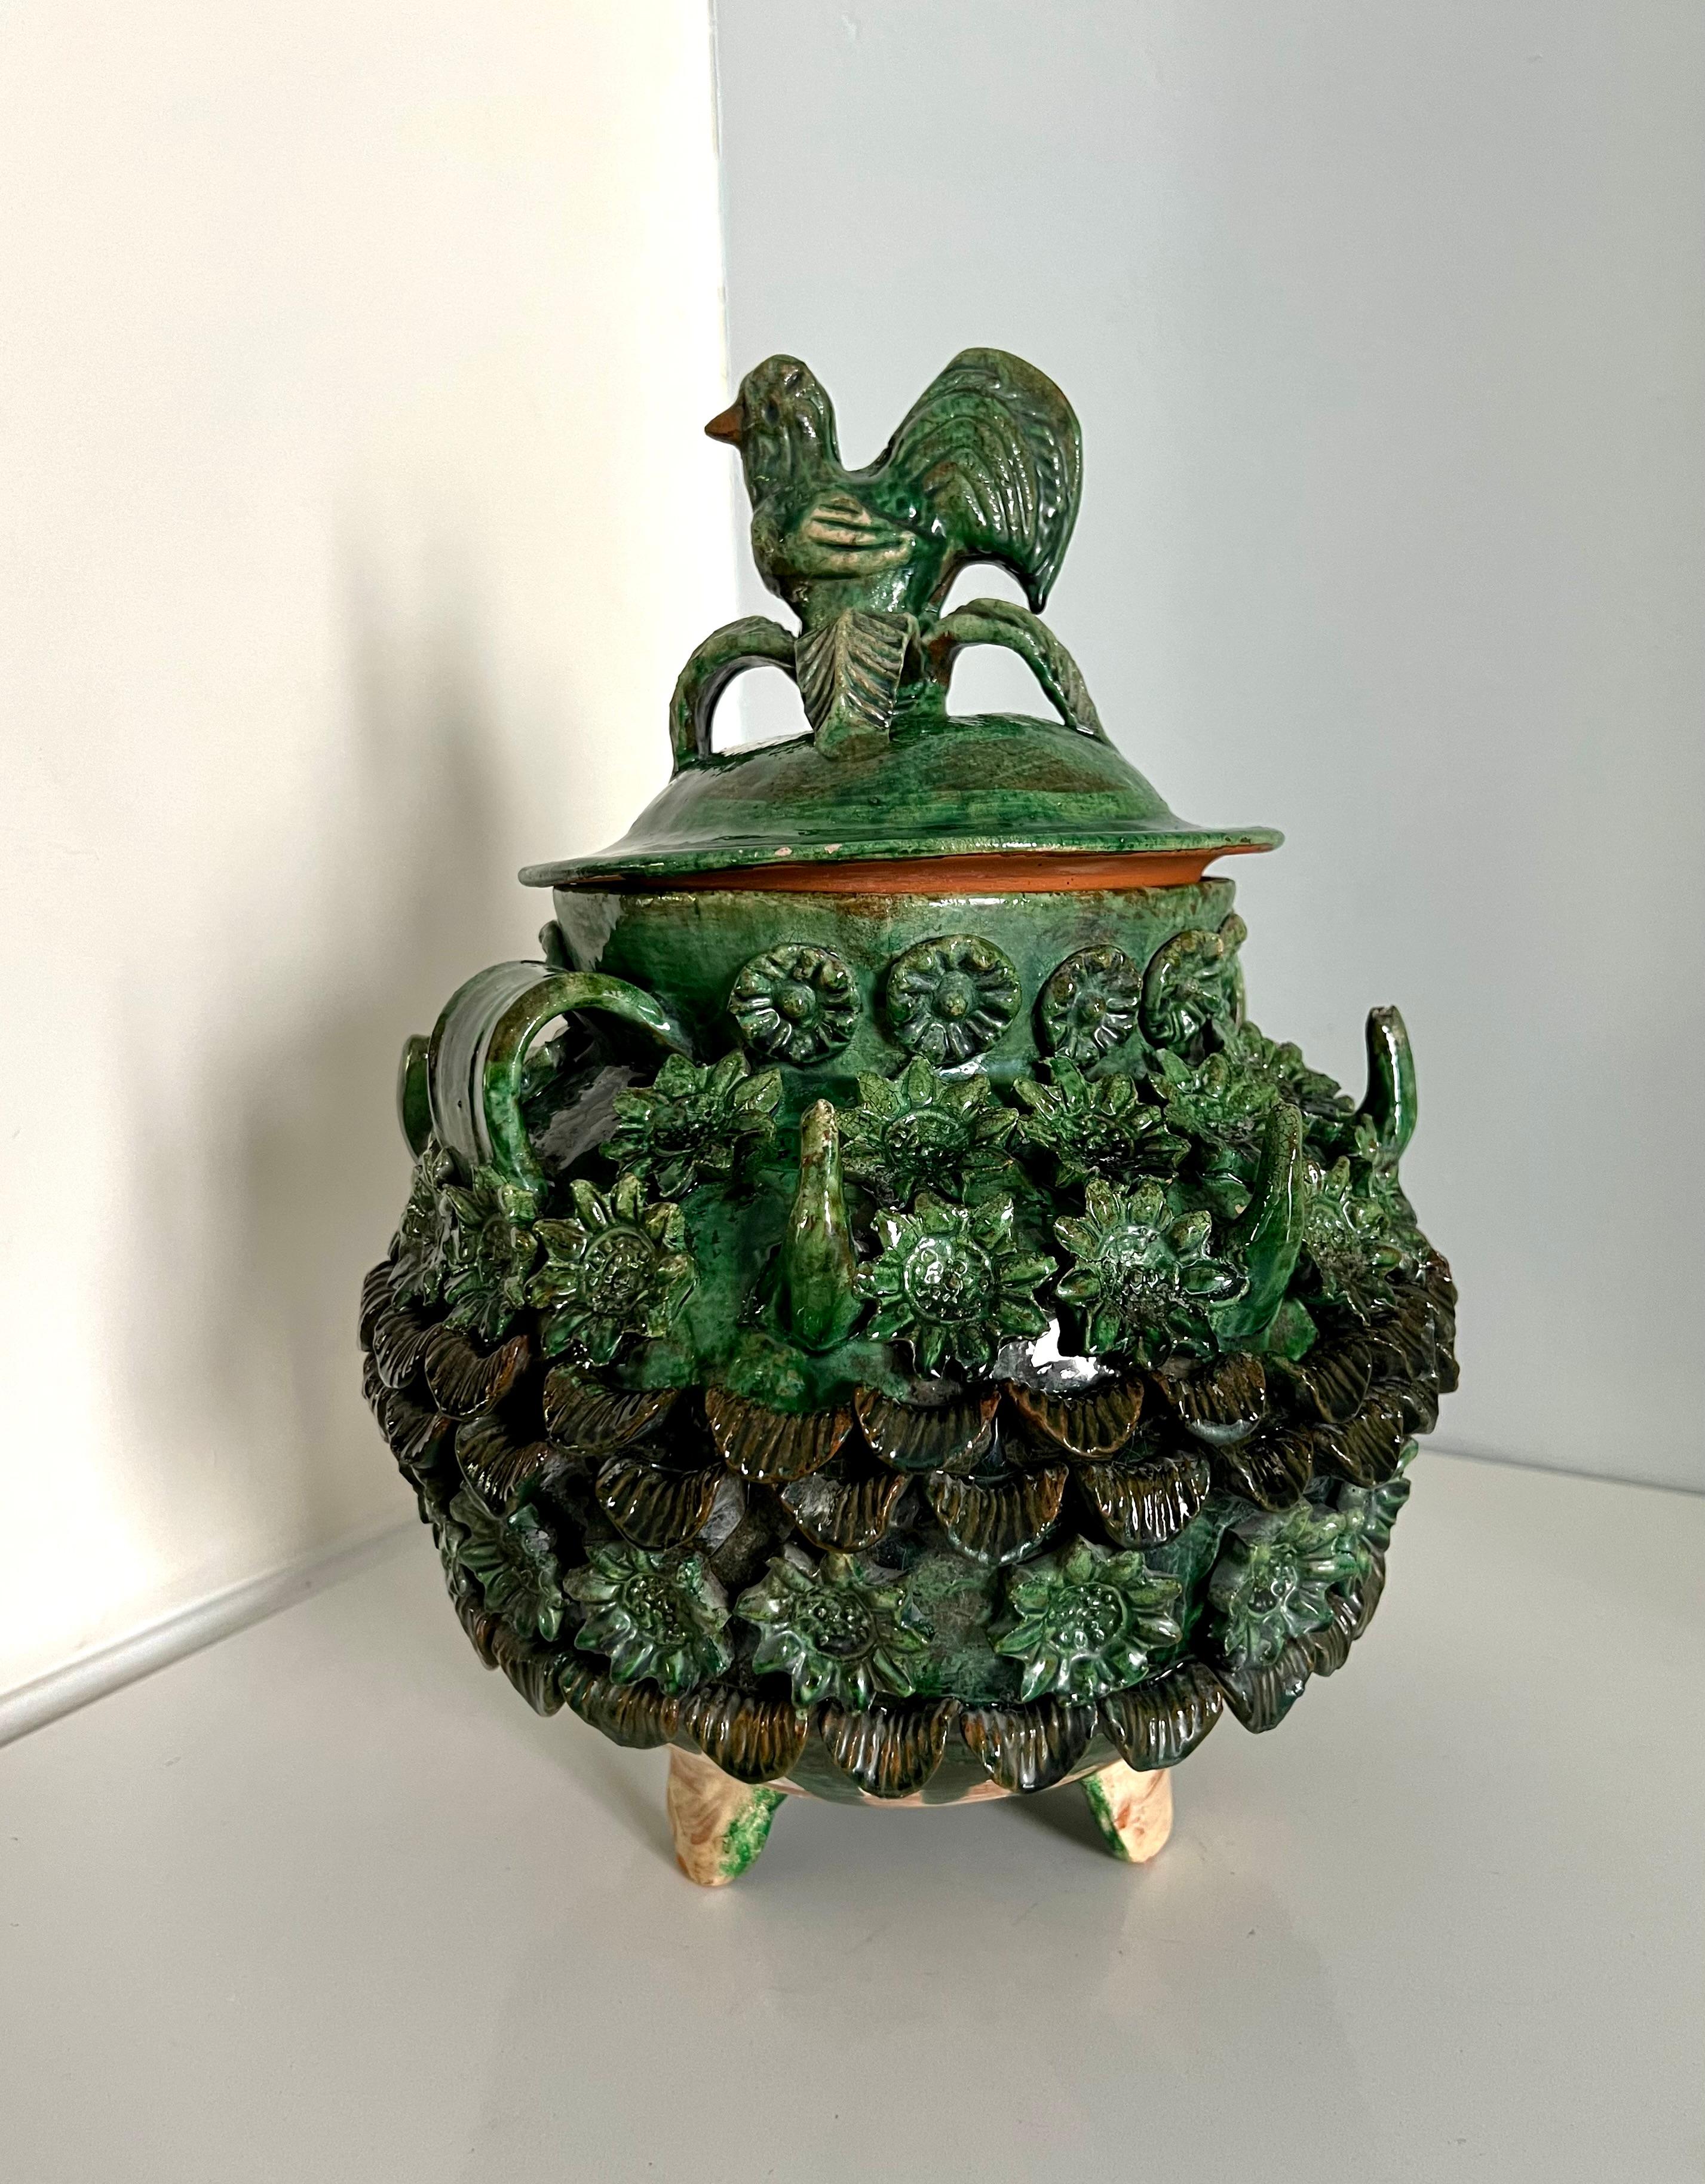 A unique Lidded terracotta majolica style jar with three dimensional flowers around and a rooster atop the lid. The container could be applicable but likely more decorative. The piece stands on three pod feet. A wonderfully attractive and decorative